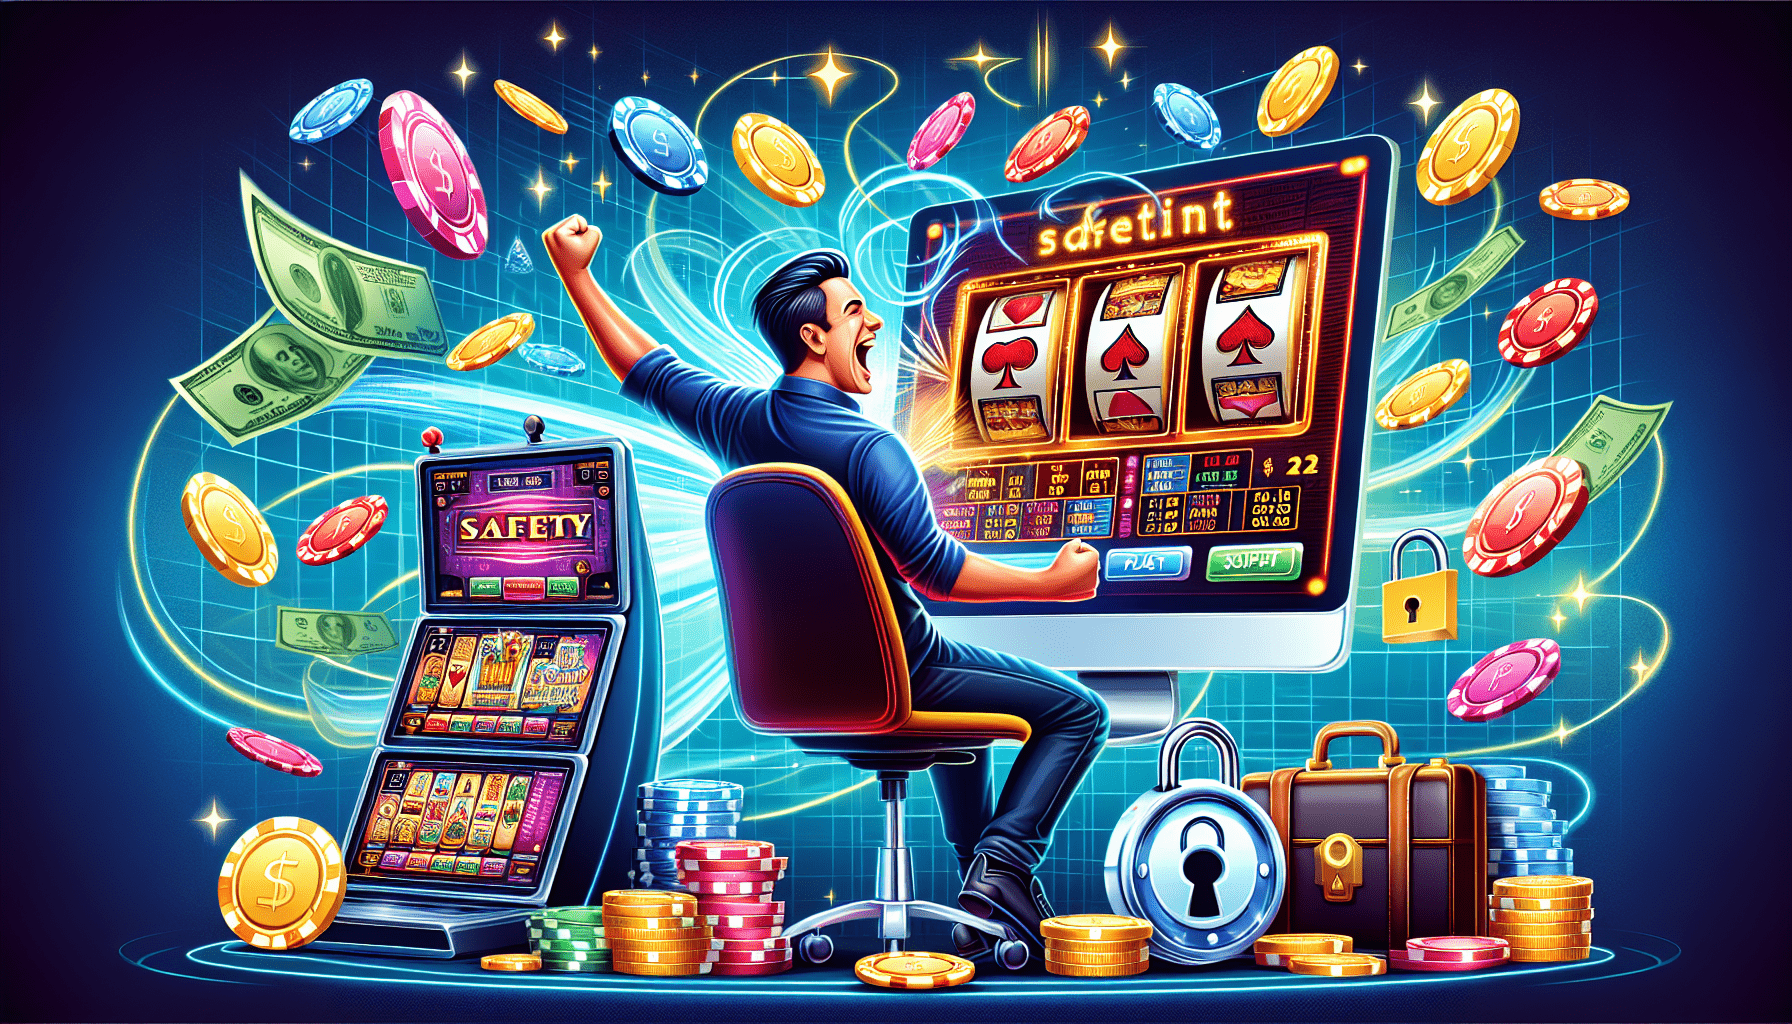 What Are Some Tips For Having Fun Safely At Online Casinos?